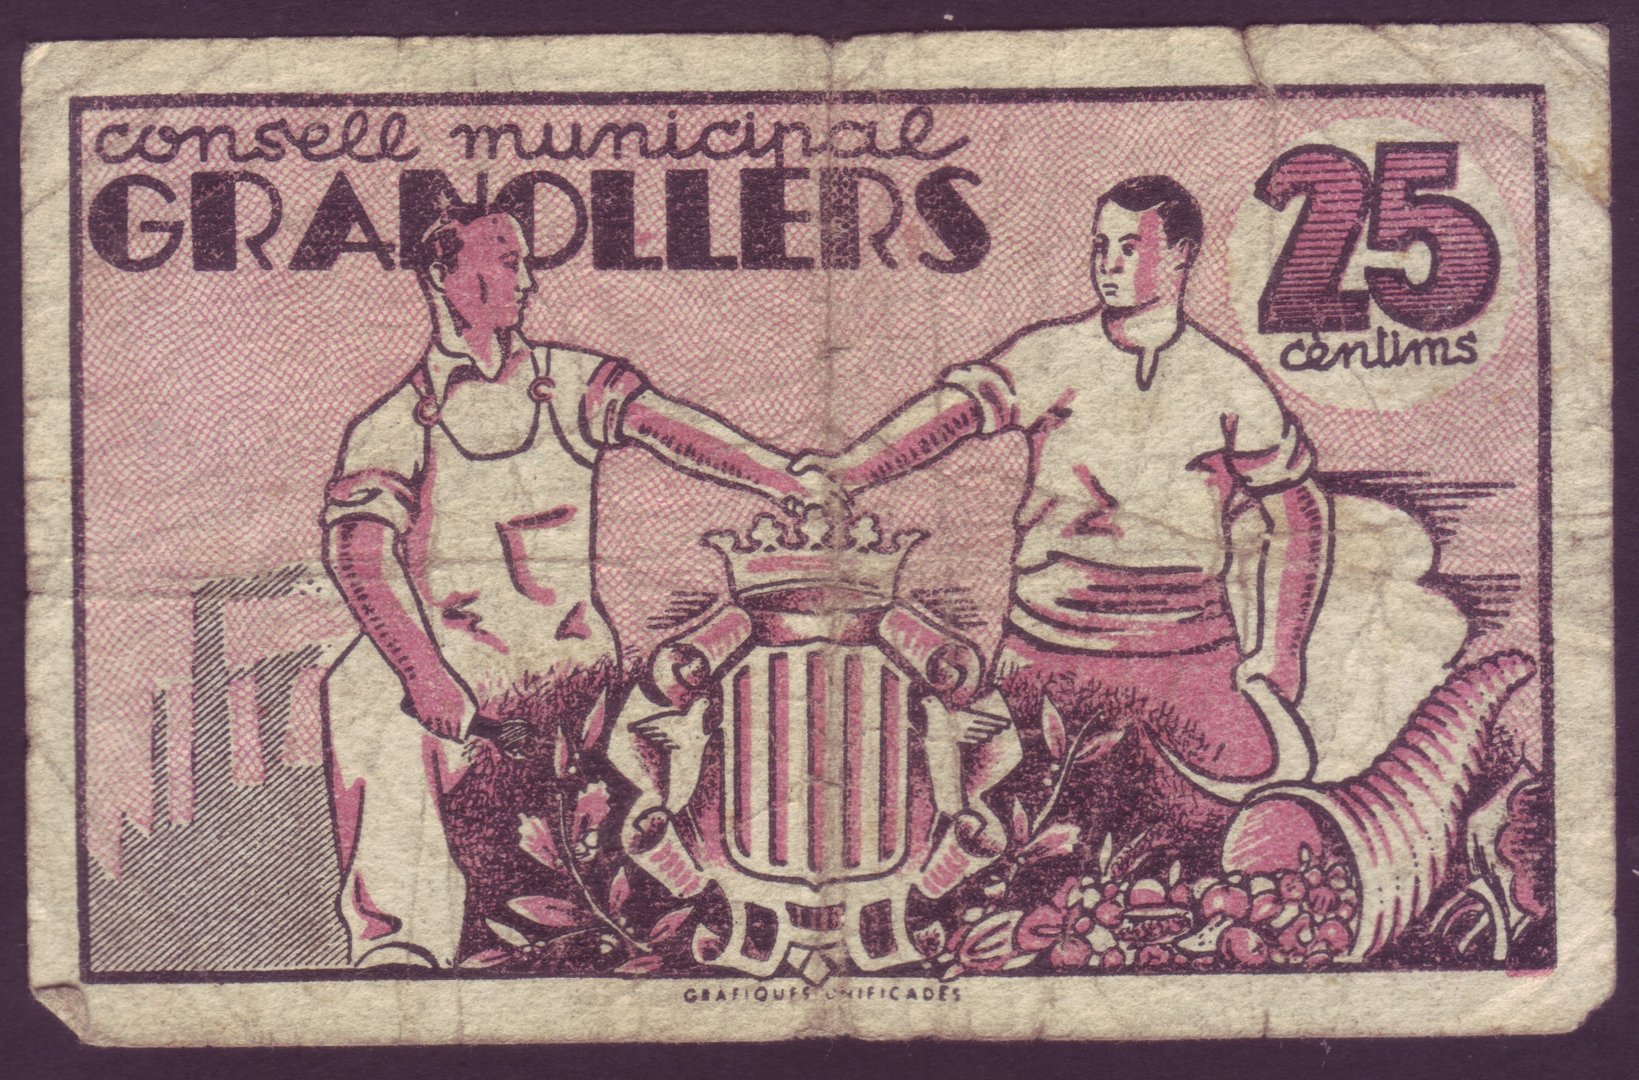 GRANOLLERS MUNICIPAL COUNCIL BANKNOTE - 25 CENTIMOS 1937- BC - SERIES 7 BILL0007d_GRANOLLERS